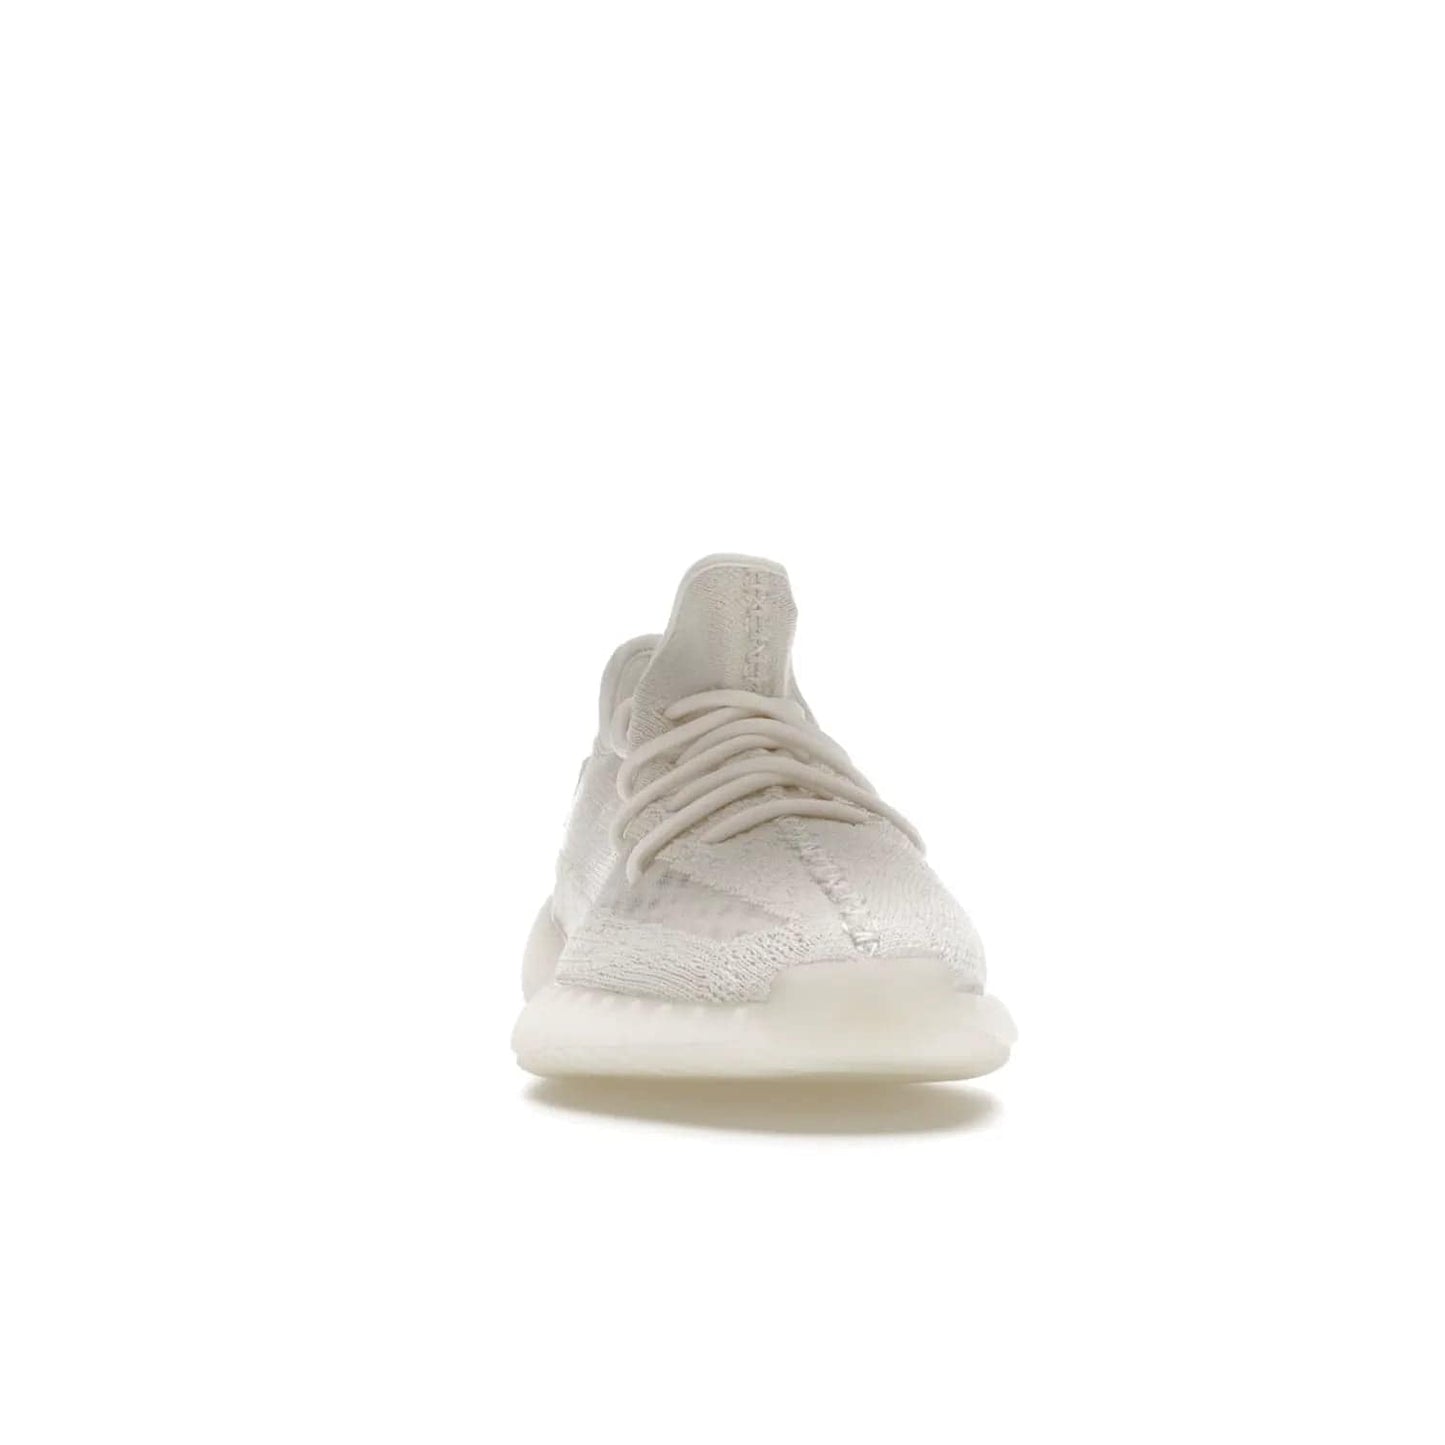 adidas Yeezy Boost 350 V2 Bone - Image 9 - Only at www.BallersClubKickz.com - Grab the stylish and comfortable adidas Yeezy Boost 350 V2 Bone in March 2022. This sneaker features a triple white Primeknit upper, mesh side stripes and canvas heel tabs, sitting atop a semi-translucent sole with Boost technology. Sure to keep your feet comfortable and stylish!